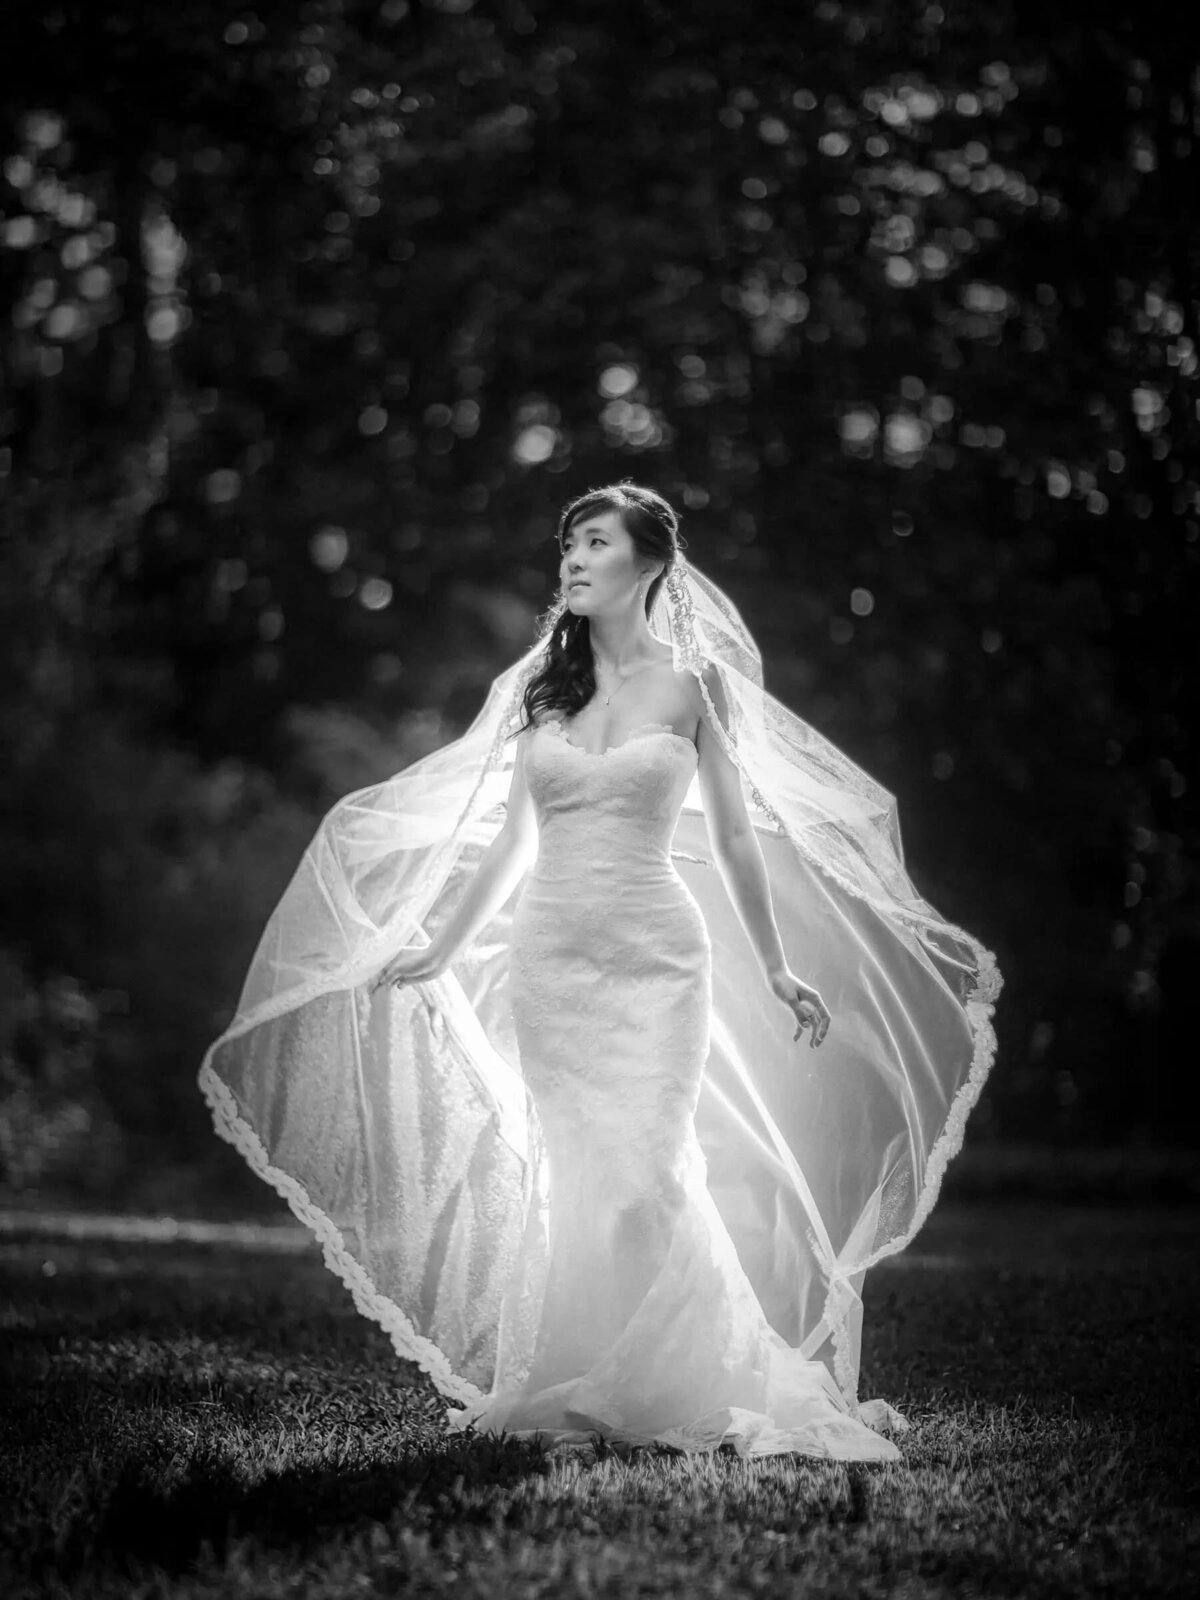 Bride in a stunning wedding dress illuminated by natural light, her veil catching the breeze in a serene outdoor setting